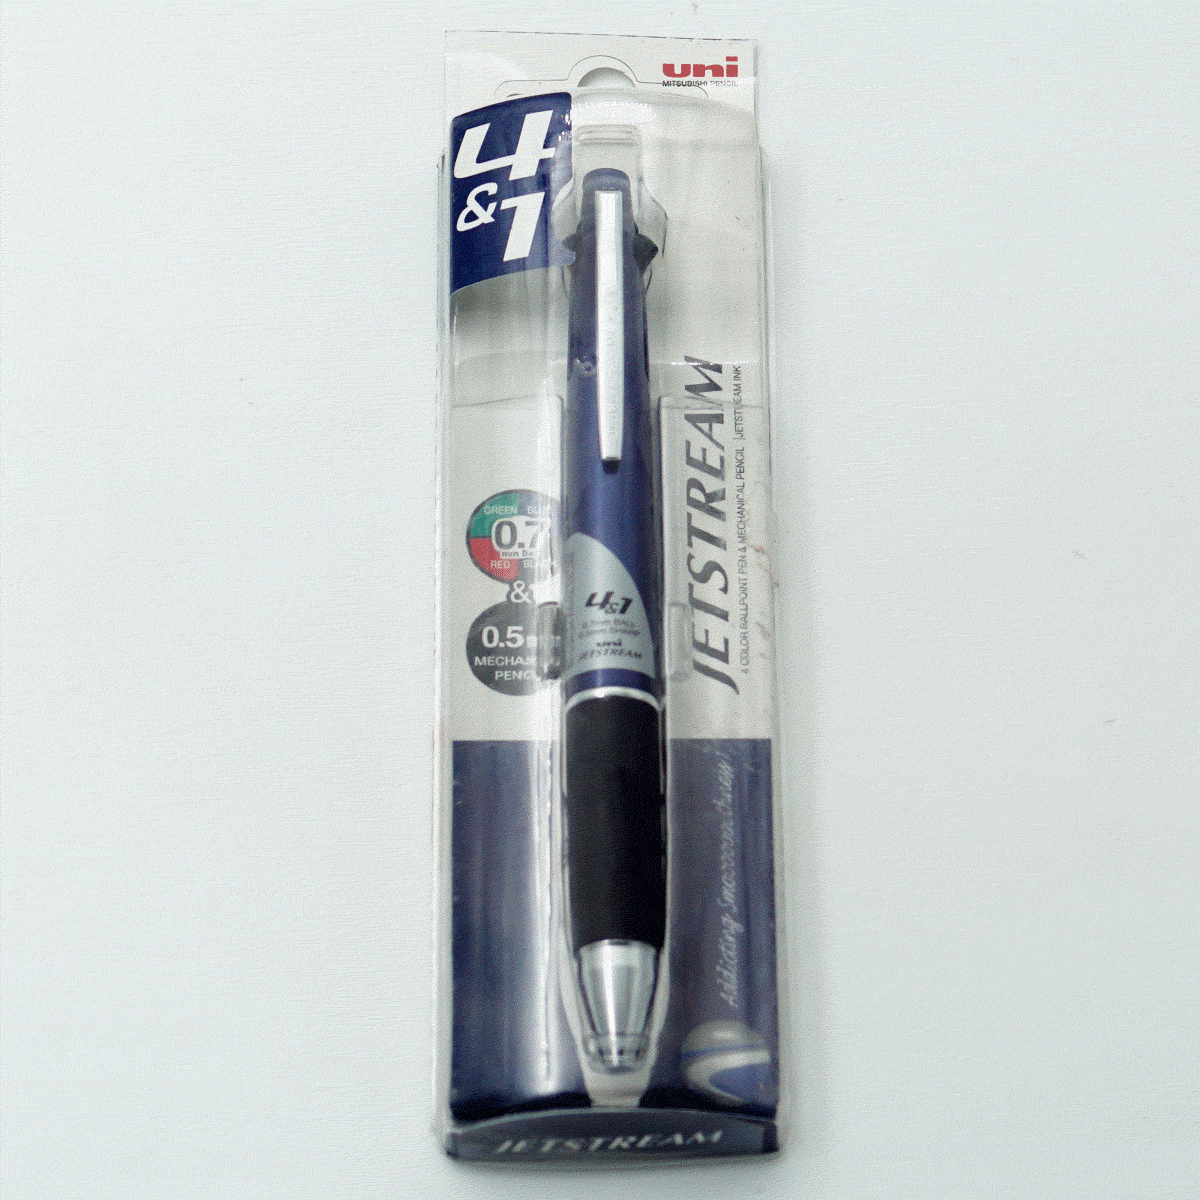 Uniball MSXE5-1000-07 Jetstream Blue Color Body With 4 Color 0.7mm Ballpoint Pen and 0.5mm Mechanical Pencil SKU 24314